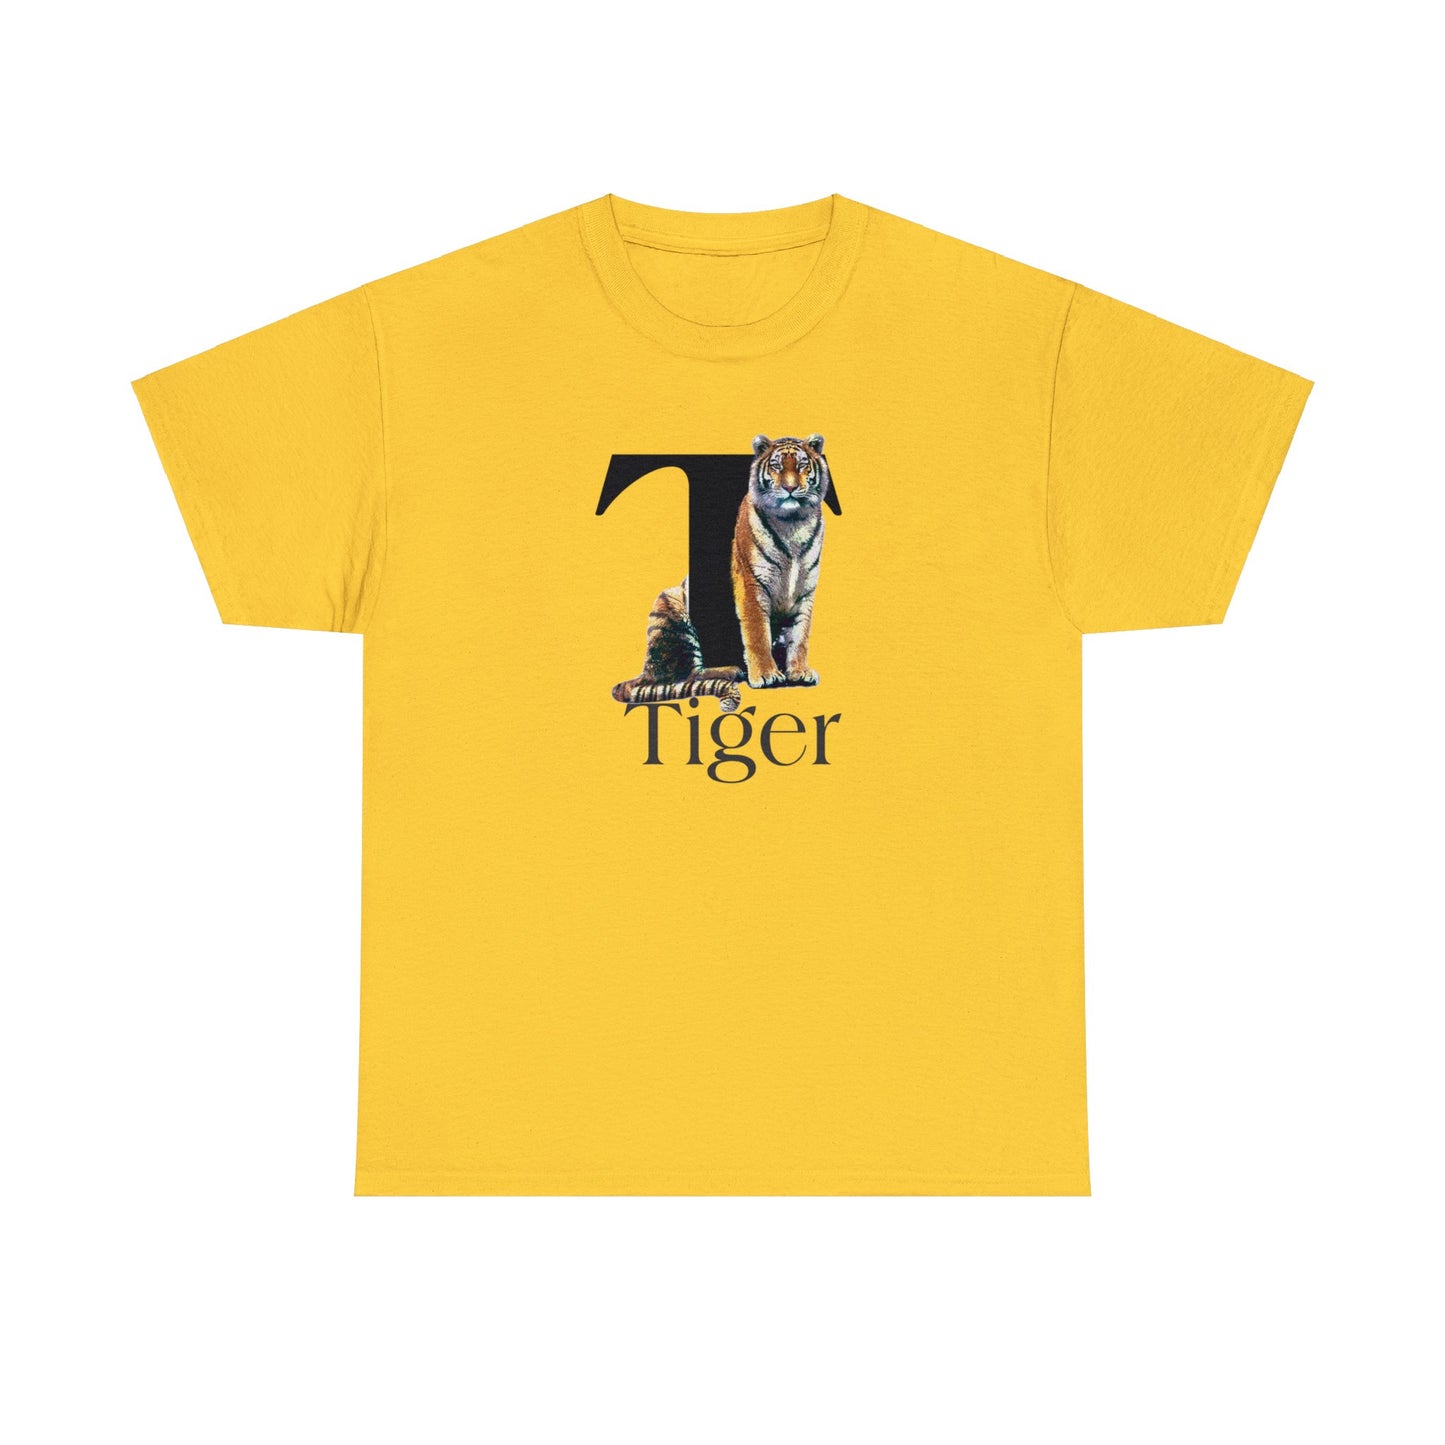 T is for Tiger Adult T-Shirt, Terrific Tiger Tee, Tiger Drawing T-Shirt, Tiger Illustration t-shirt,